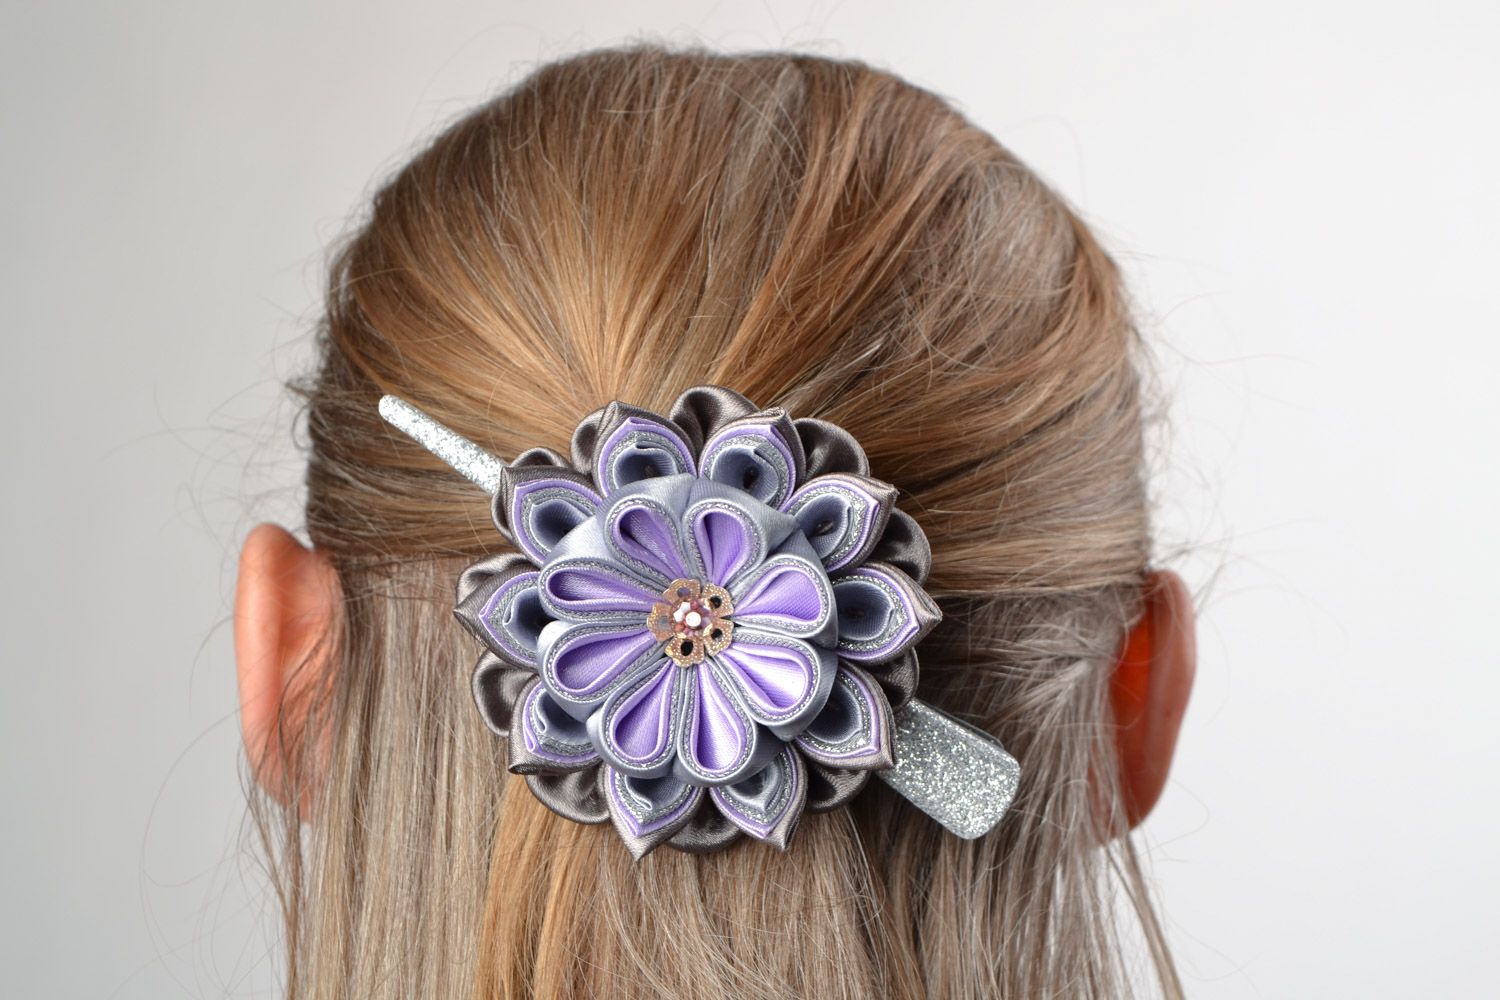 Handmade flower hairpin made of satin and brocade ribbons kanzashi technique photo 1